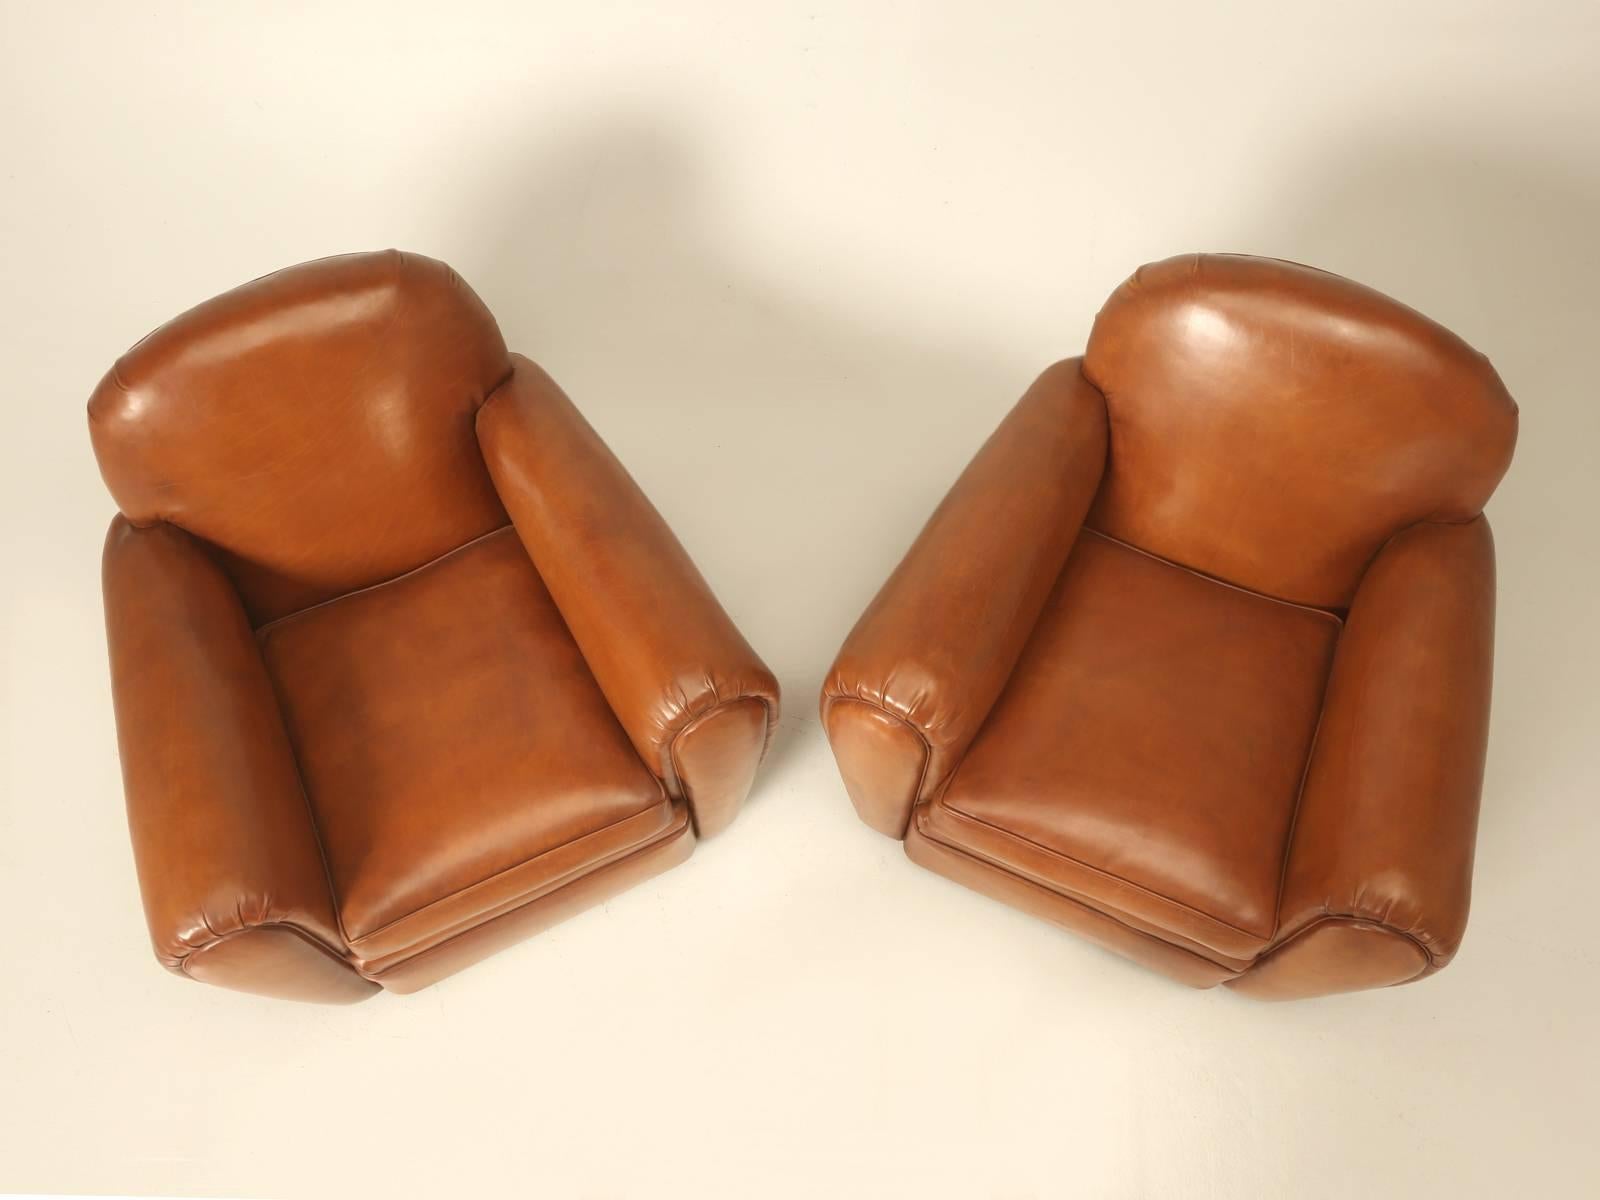 Hand-Crafted Pair of French Art Deco Leather Club Chairs Completely Restored